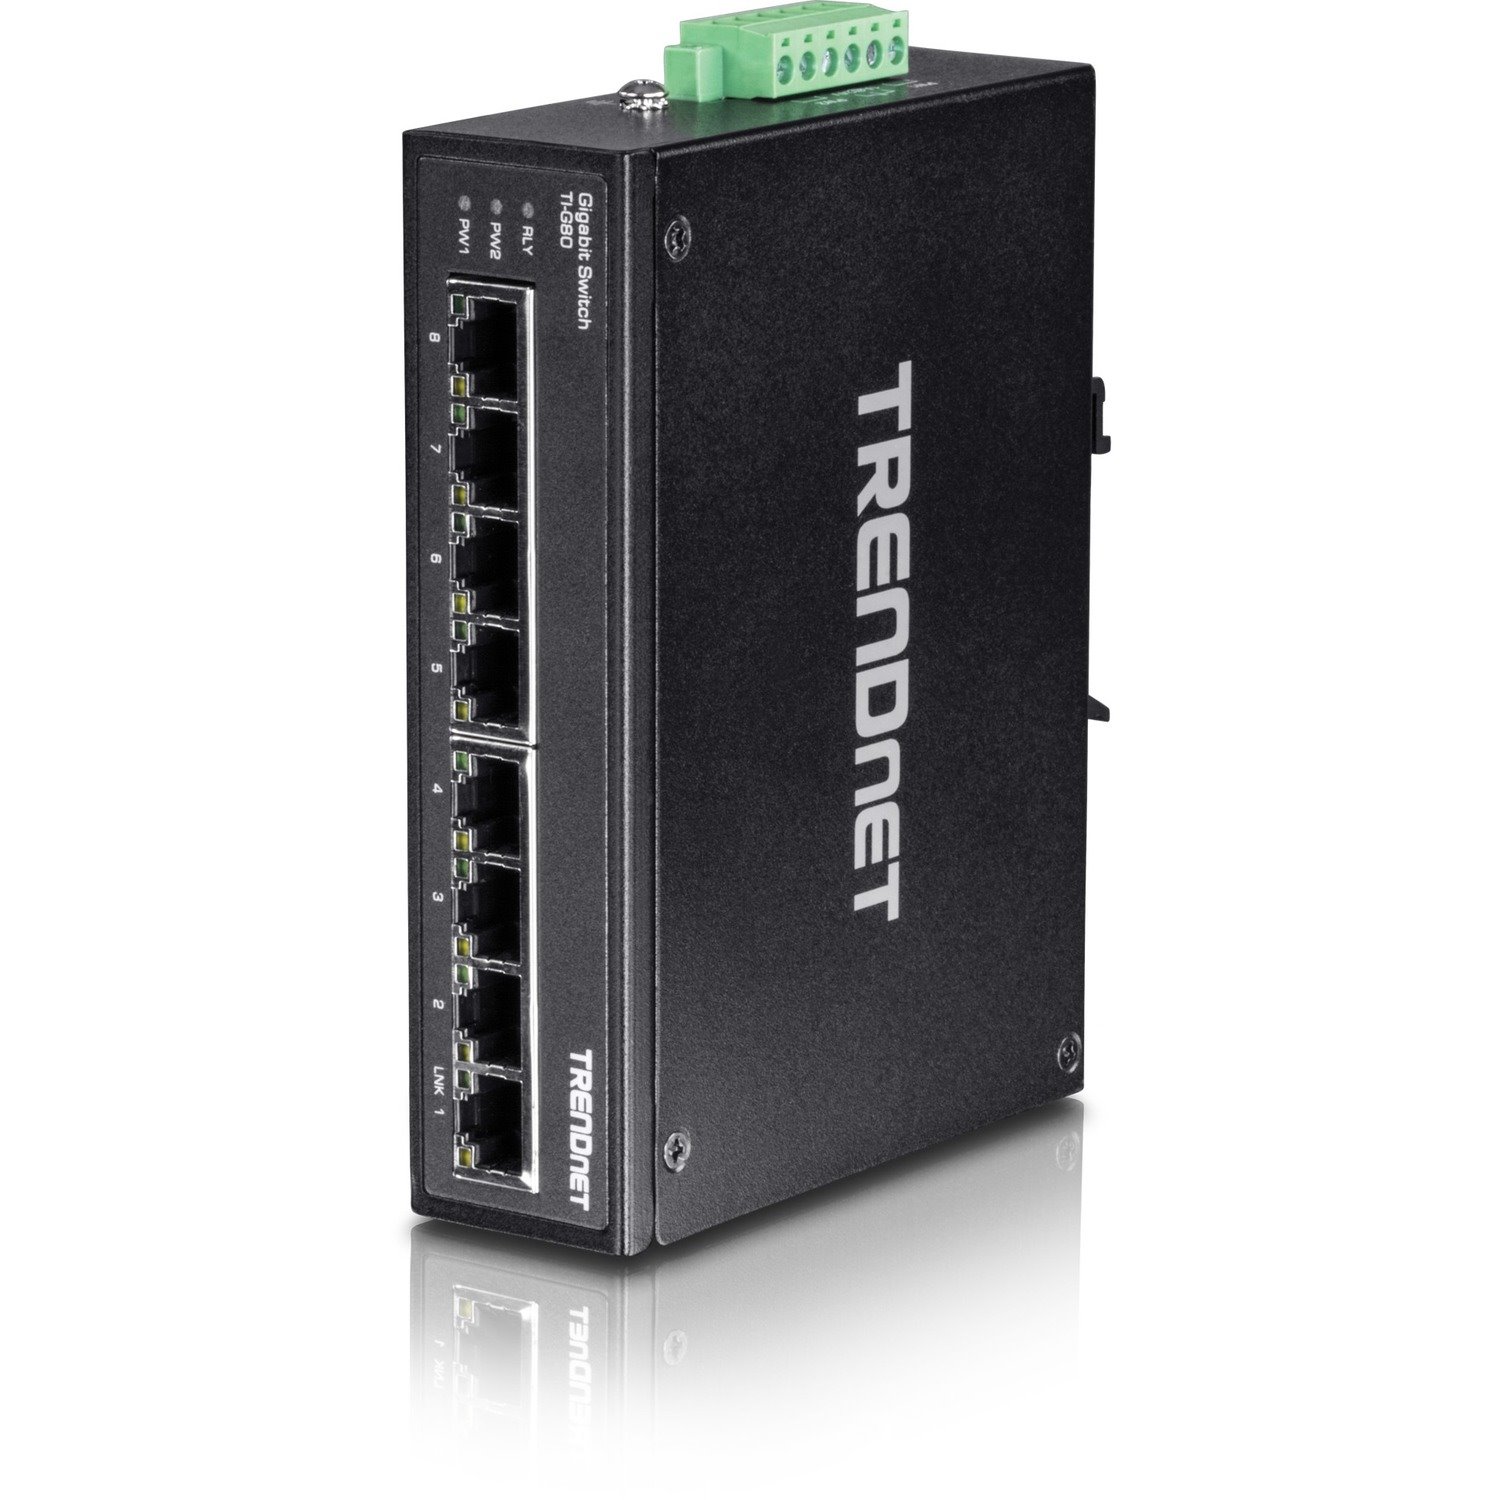 TRENDnet 8-Port Hardened Industrial Gigabit DIN-Rail Switch, 16 Gbps Switching Capacity, IP30 Rated Metal Housing (-40 to 167 ?F), DIN-Rail & Wall Mounts Included, Lifetime Protection, Black, TI-G80